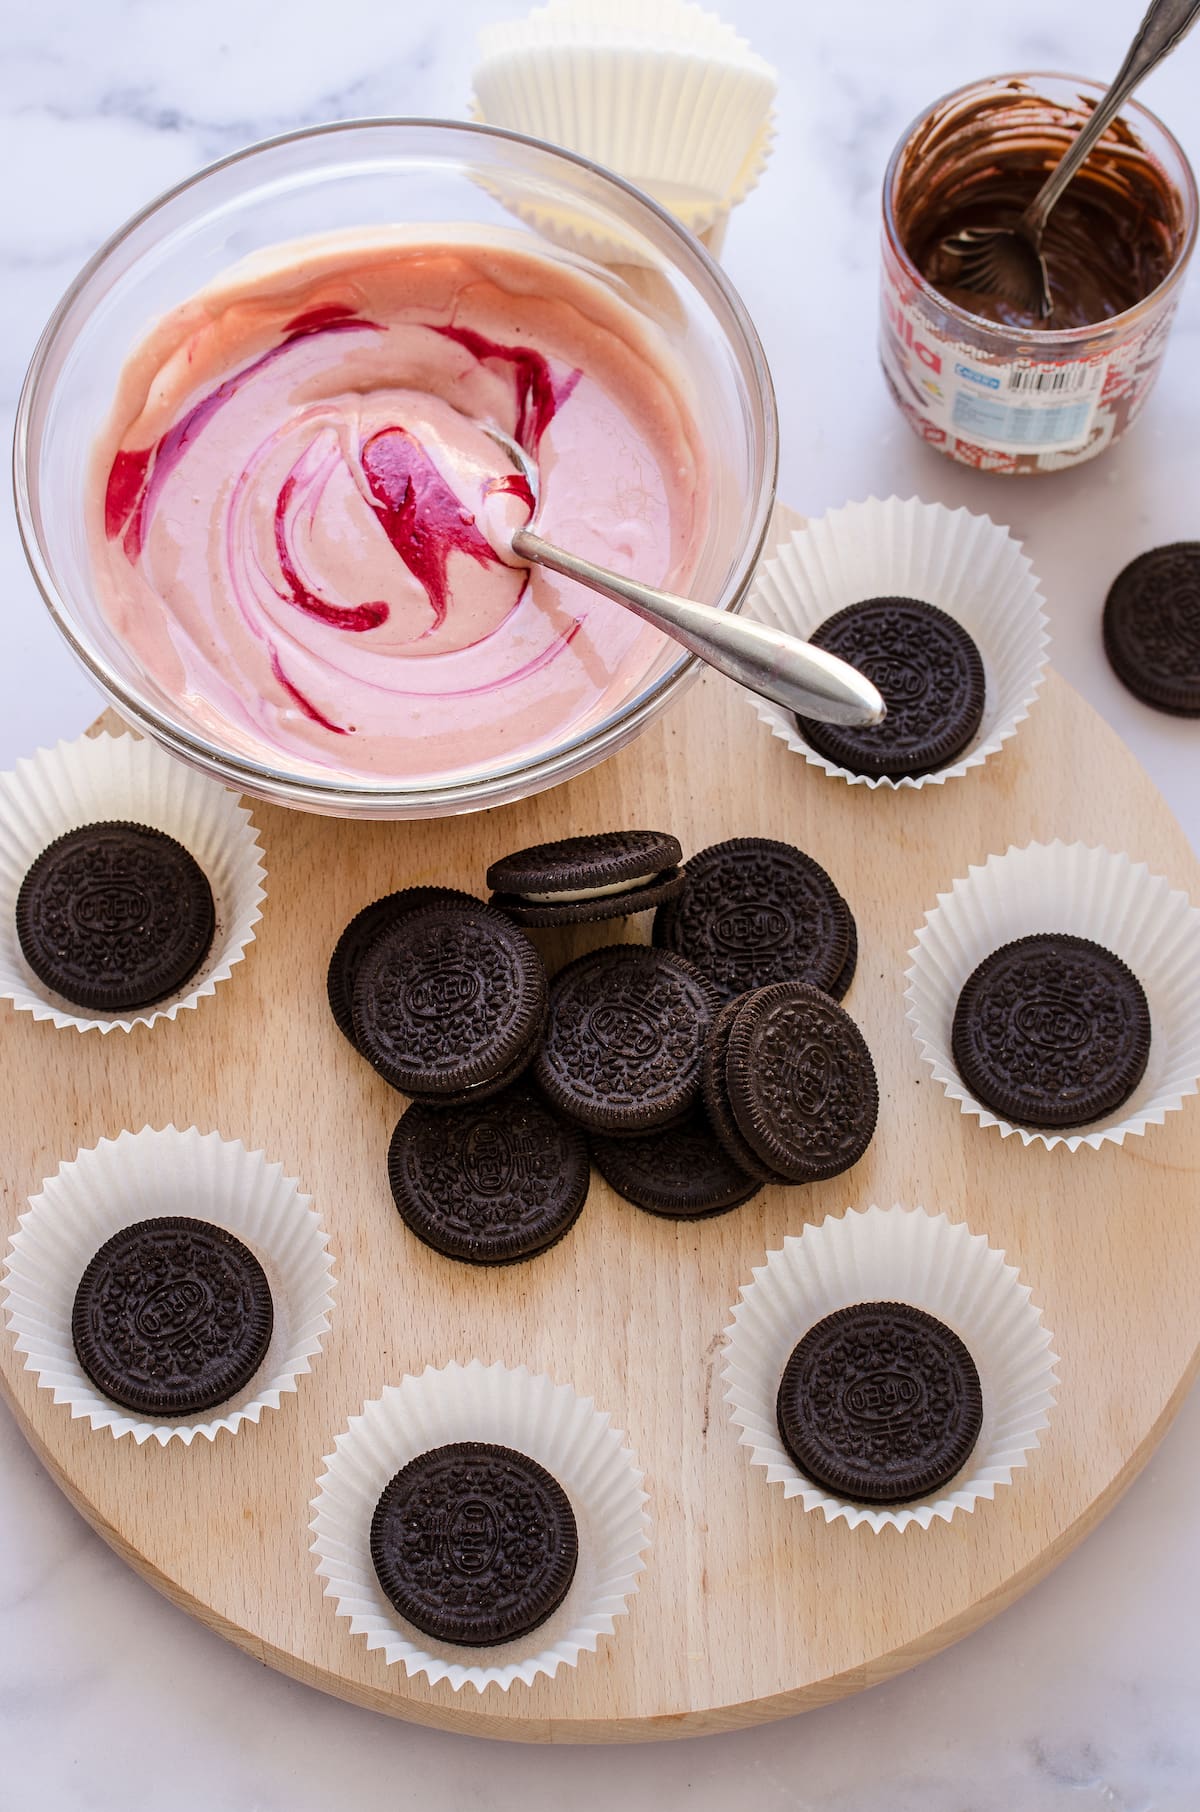 Oreos in cupcake liners and red velvet cheesecake batter in the background